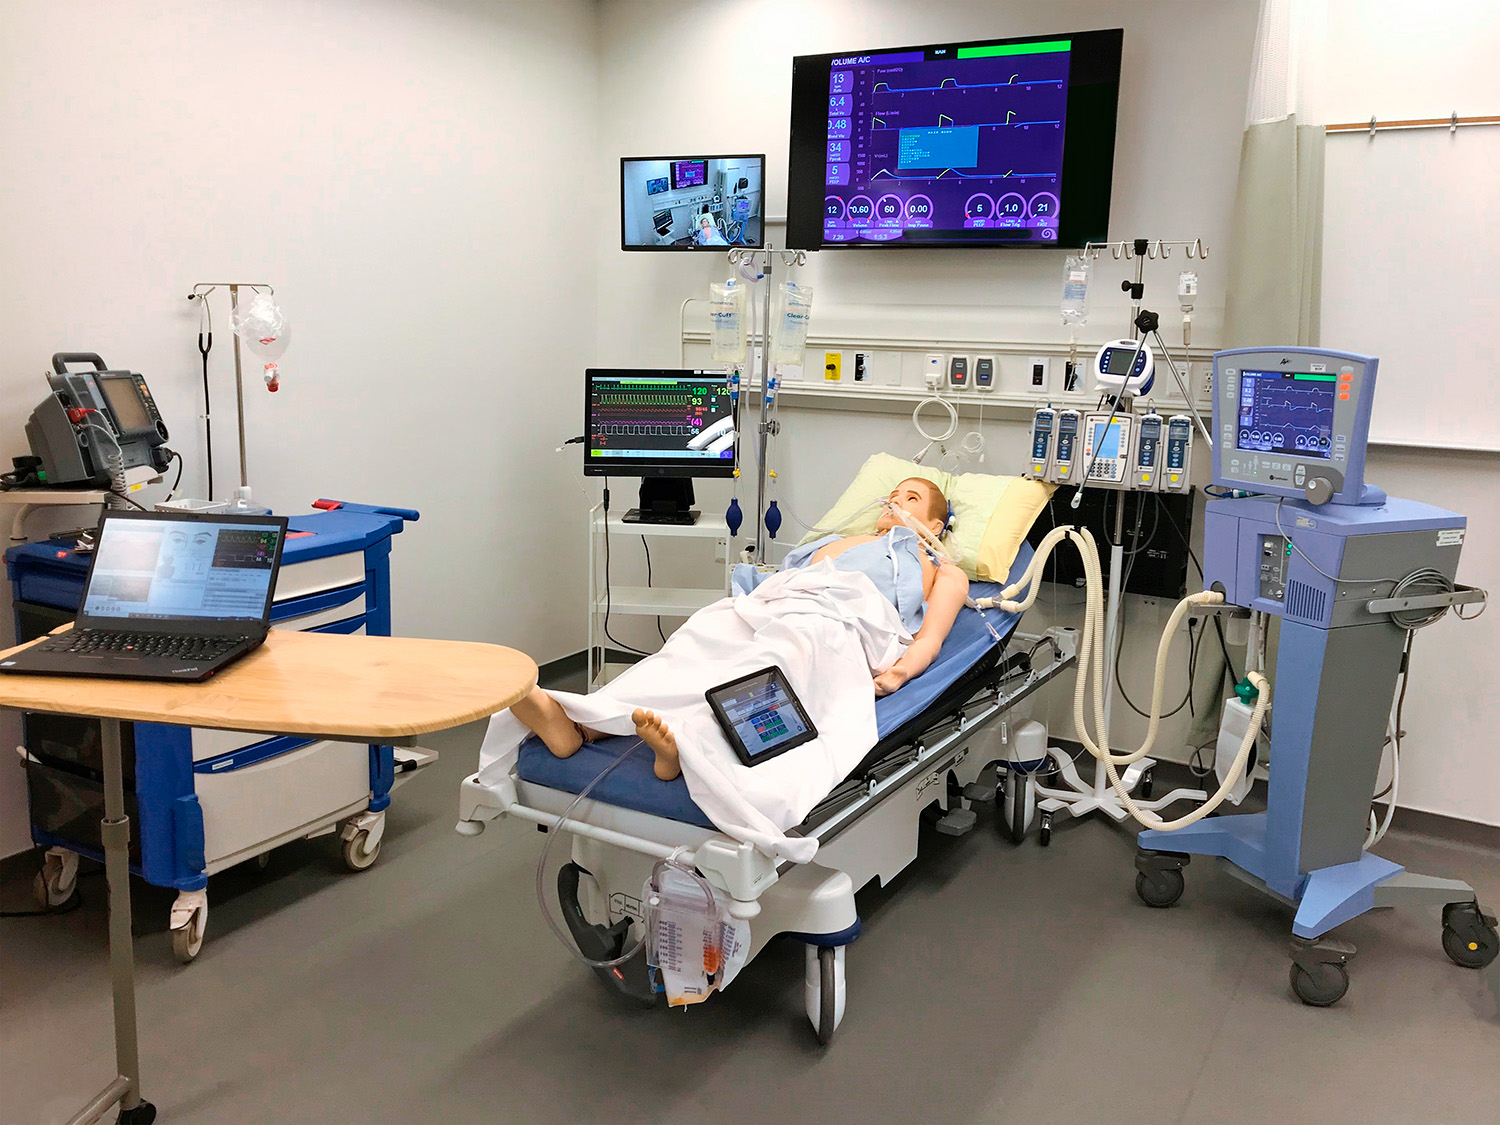 Certain areas are set up for teaching specific medical procedures, such as this ventilator bed station.